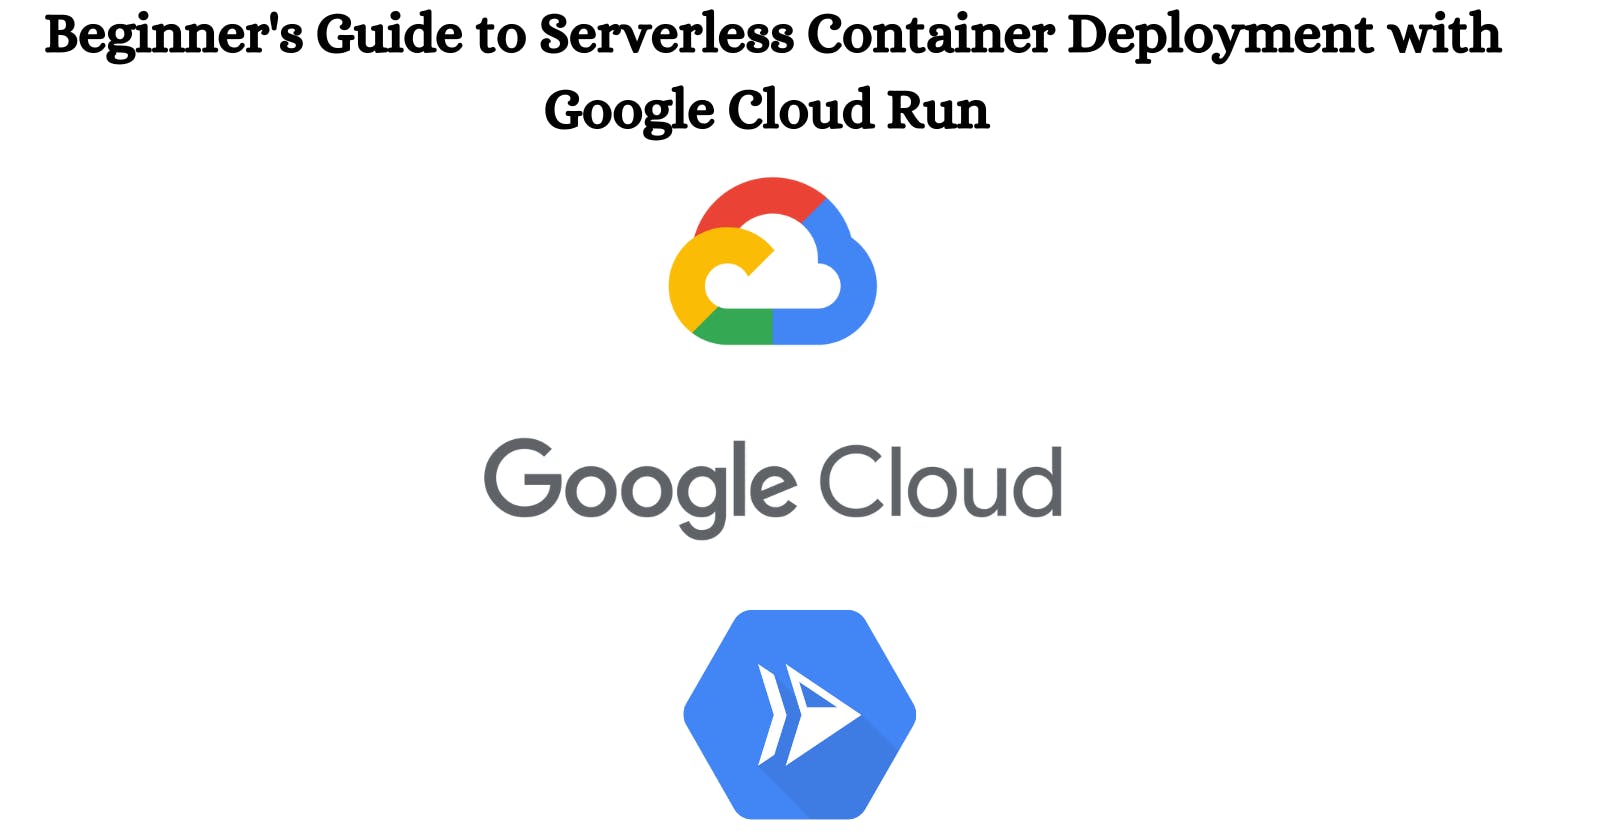 Beginner's Guide to Serverless Container Deployment with Google Cloud Run